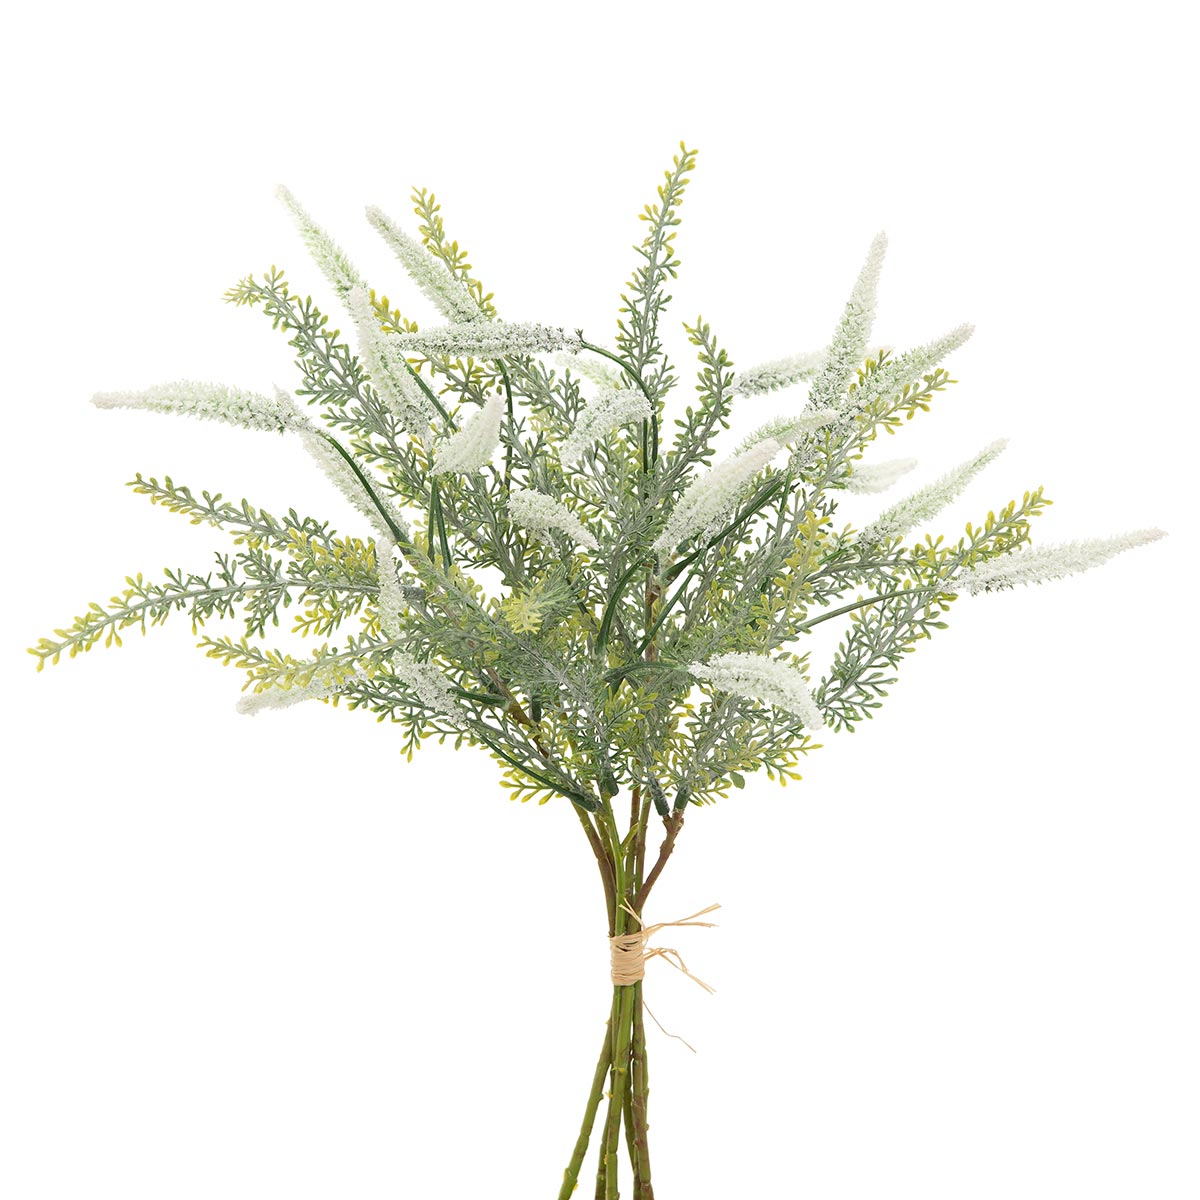 ASTILBE AND GRASS BUNDLE OF 6 TIED WITH RAFFIA WHITE 10"X16"